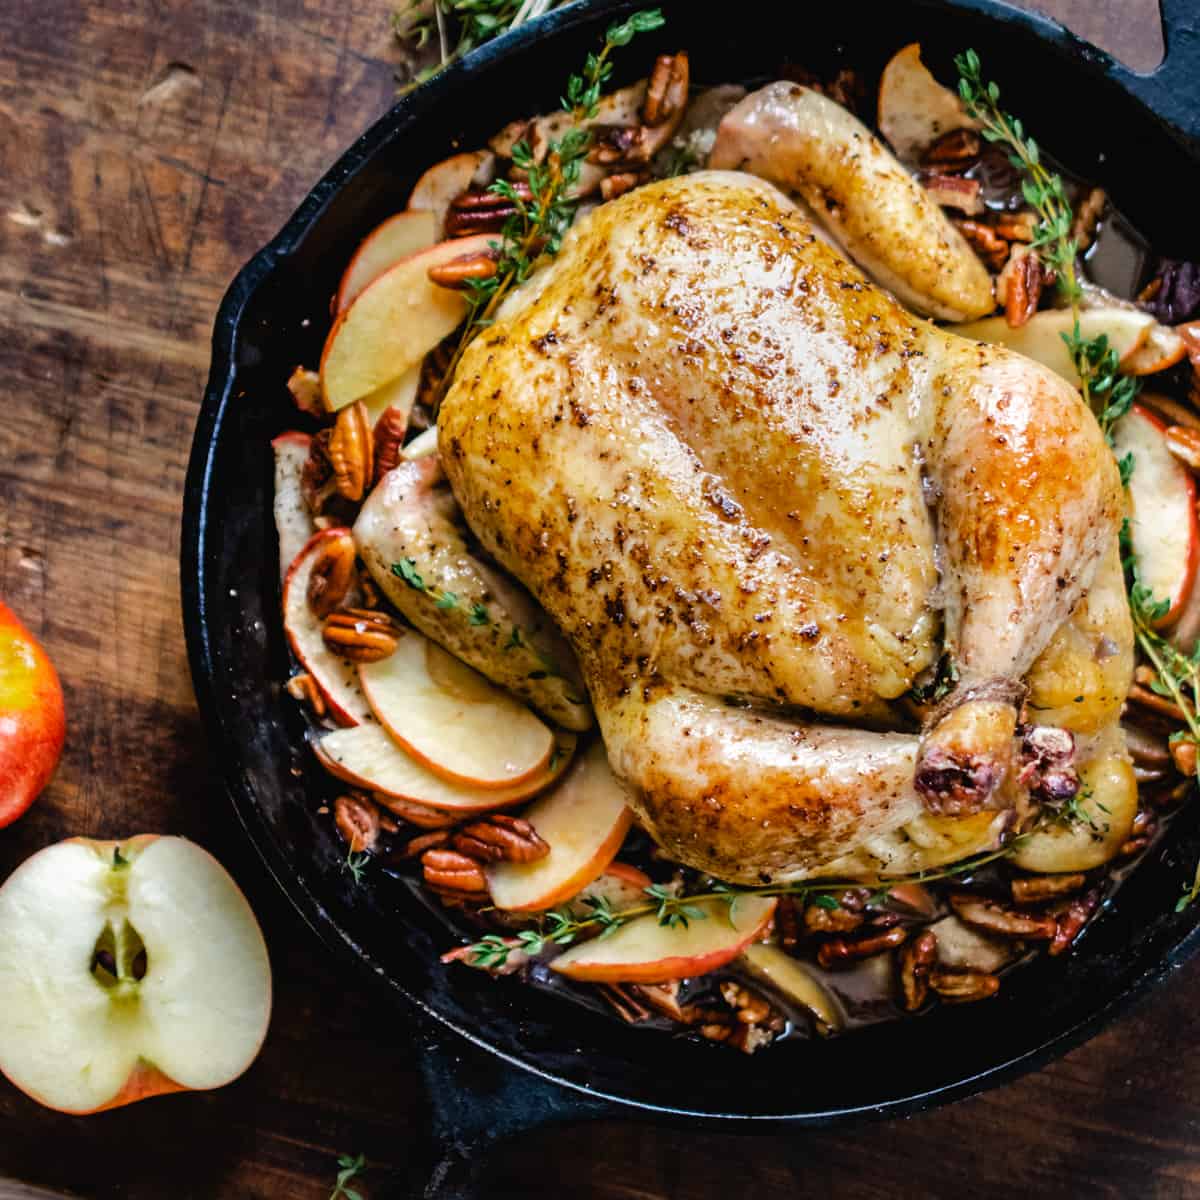 Roast whole chicken on a bed of apples and pan sauce.